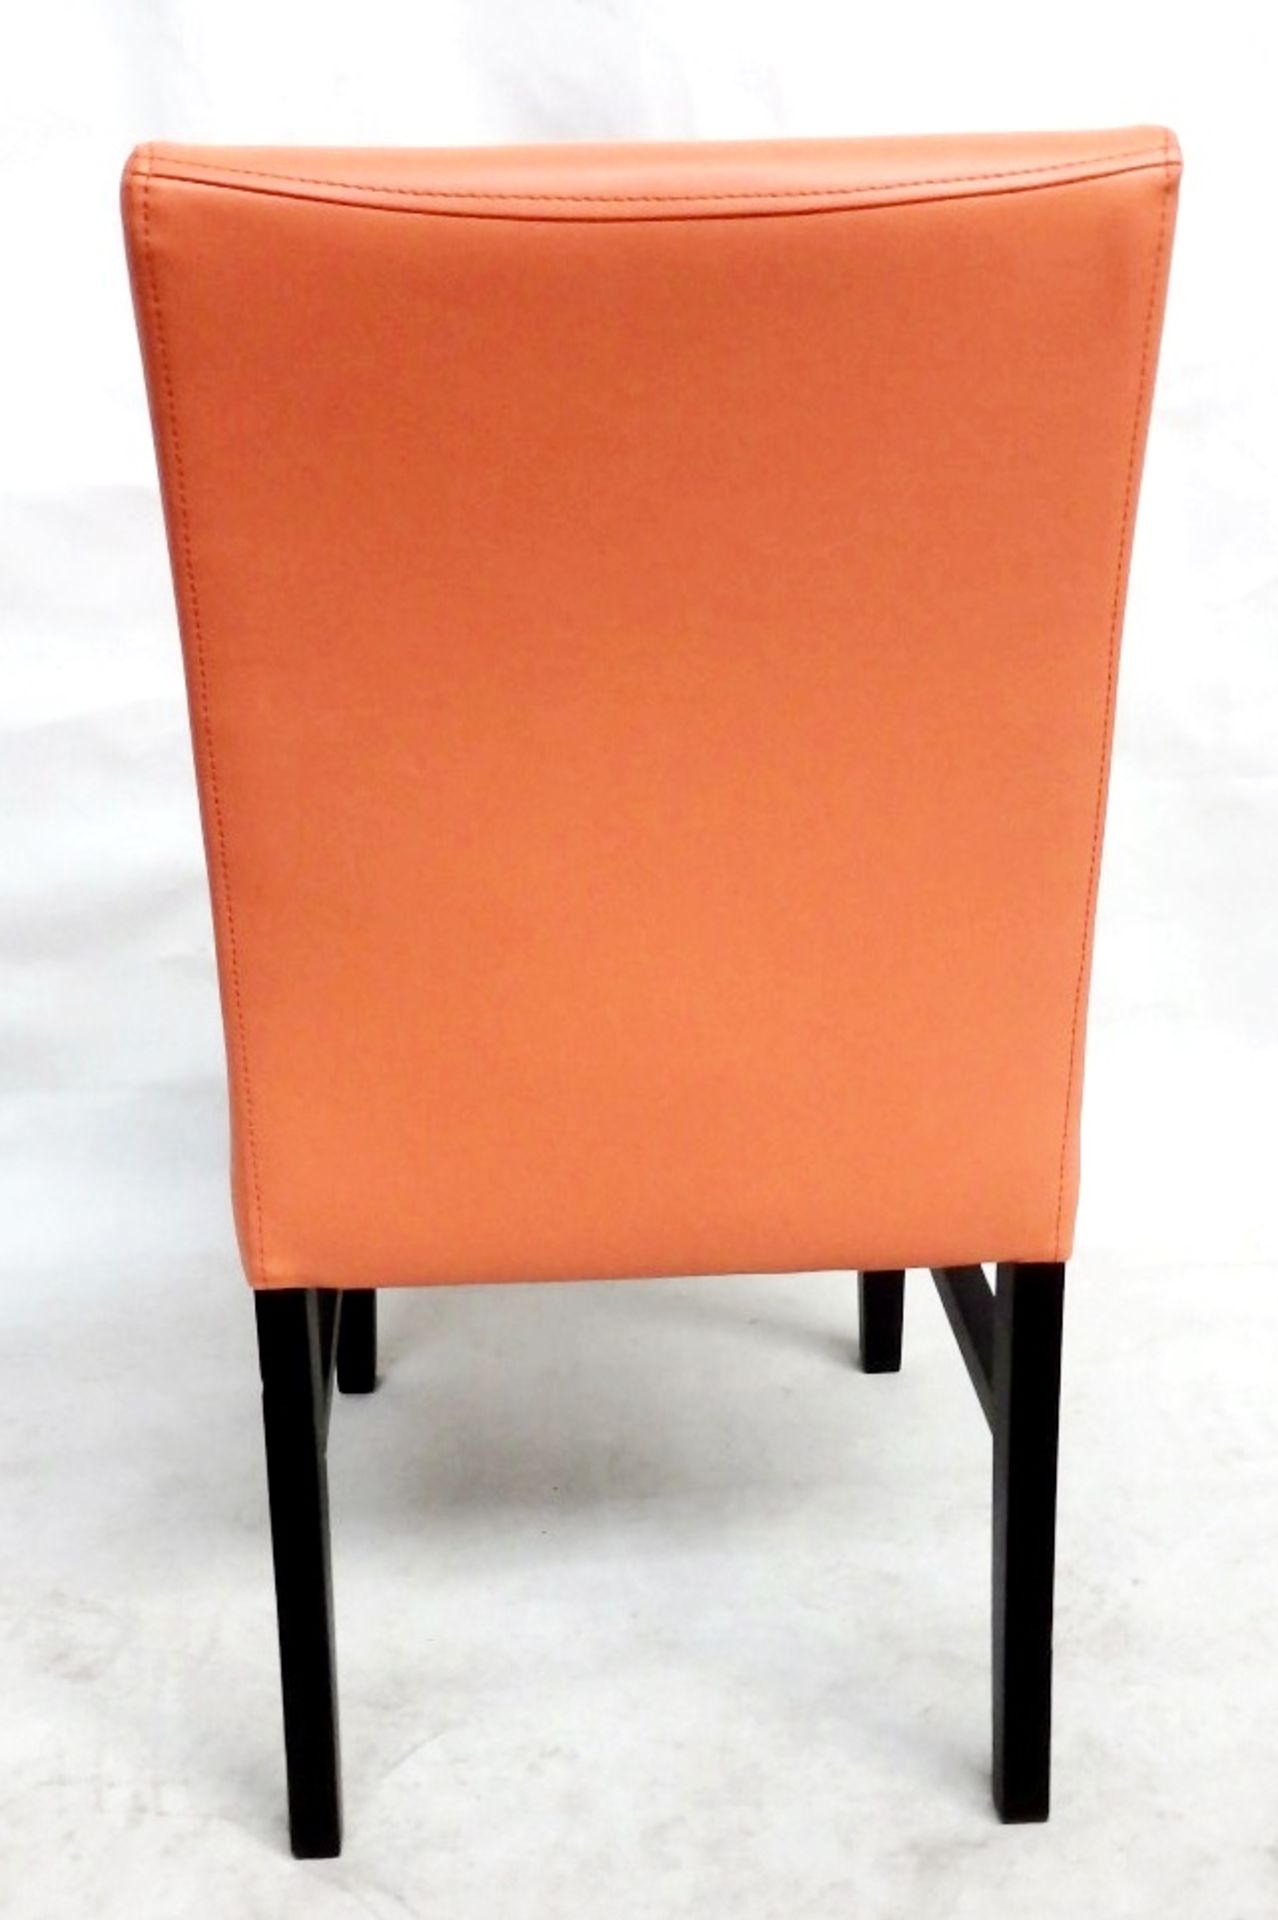 1 x Bright Orange Soft Leather Chair - Handcrafted & Upholstered By British Craftsmen - - Image 4 of 5